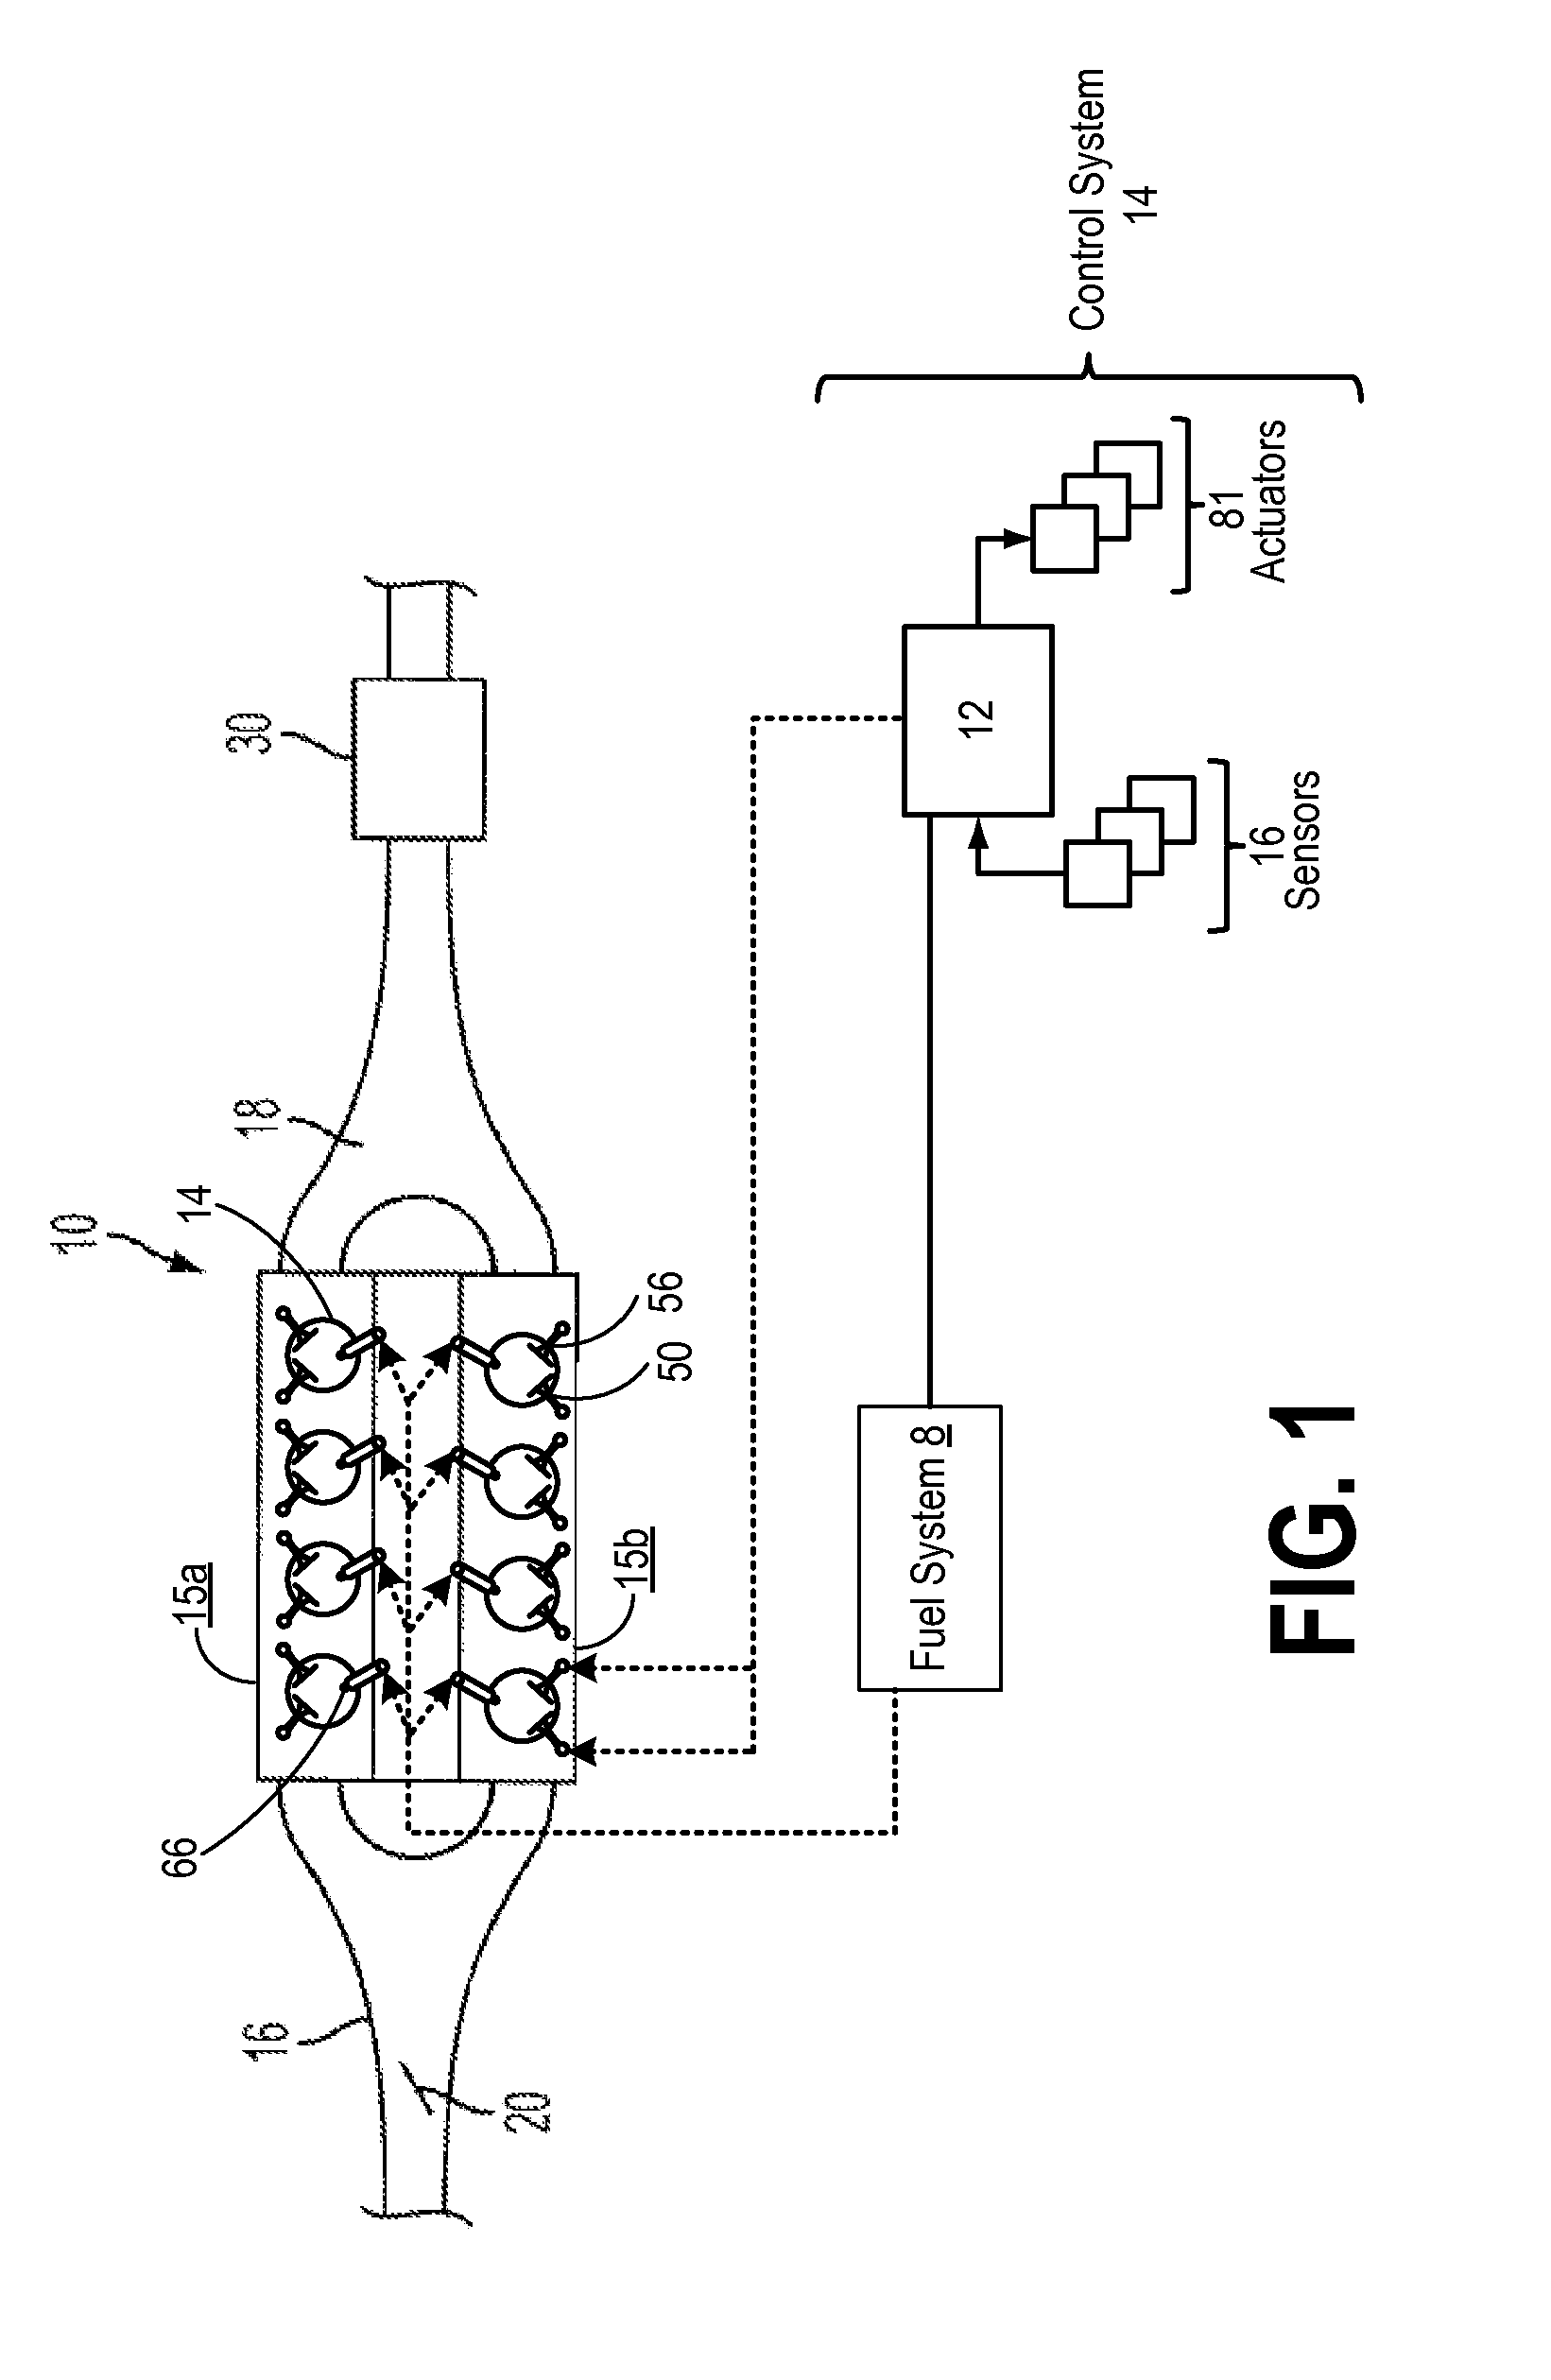 Method and system for particulate matter control